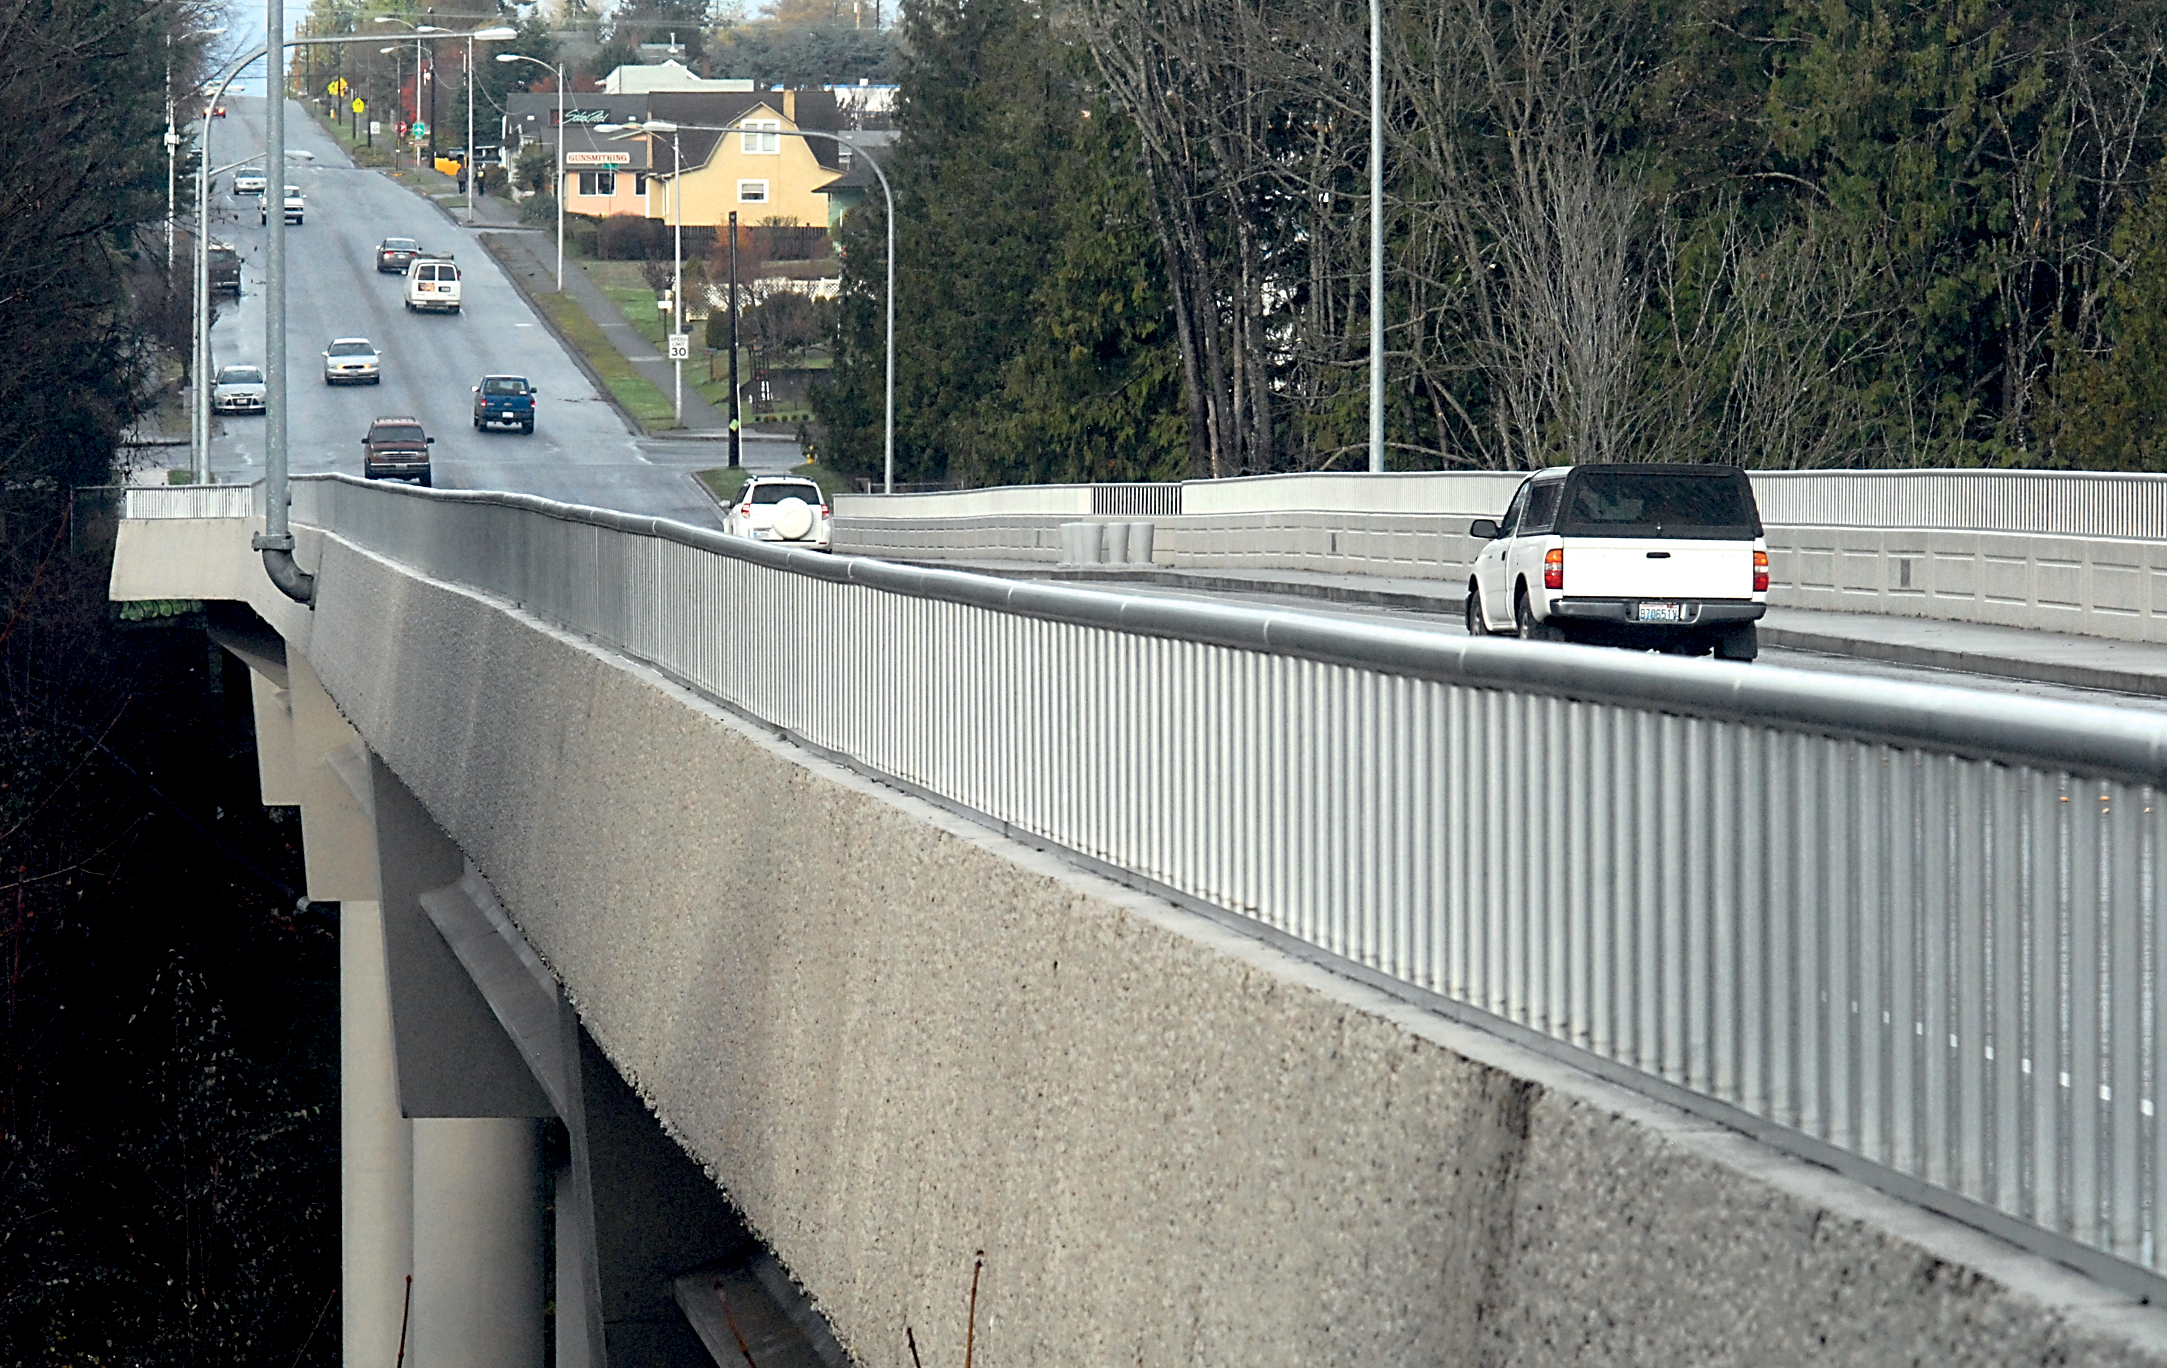 Traffic makes its way across the Eighth Street bridge over Tumwater Creek in Port Angeles. — Keith Thorpe/Peninsula Daily News